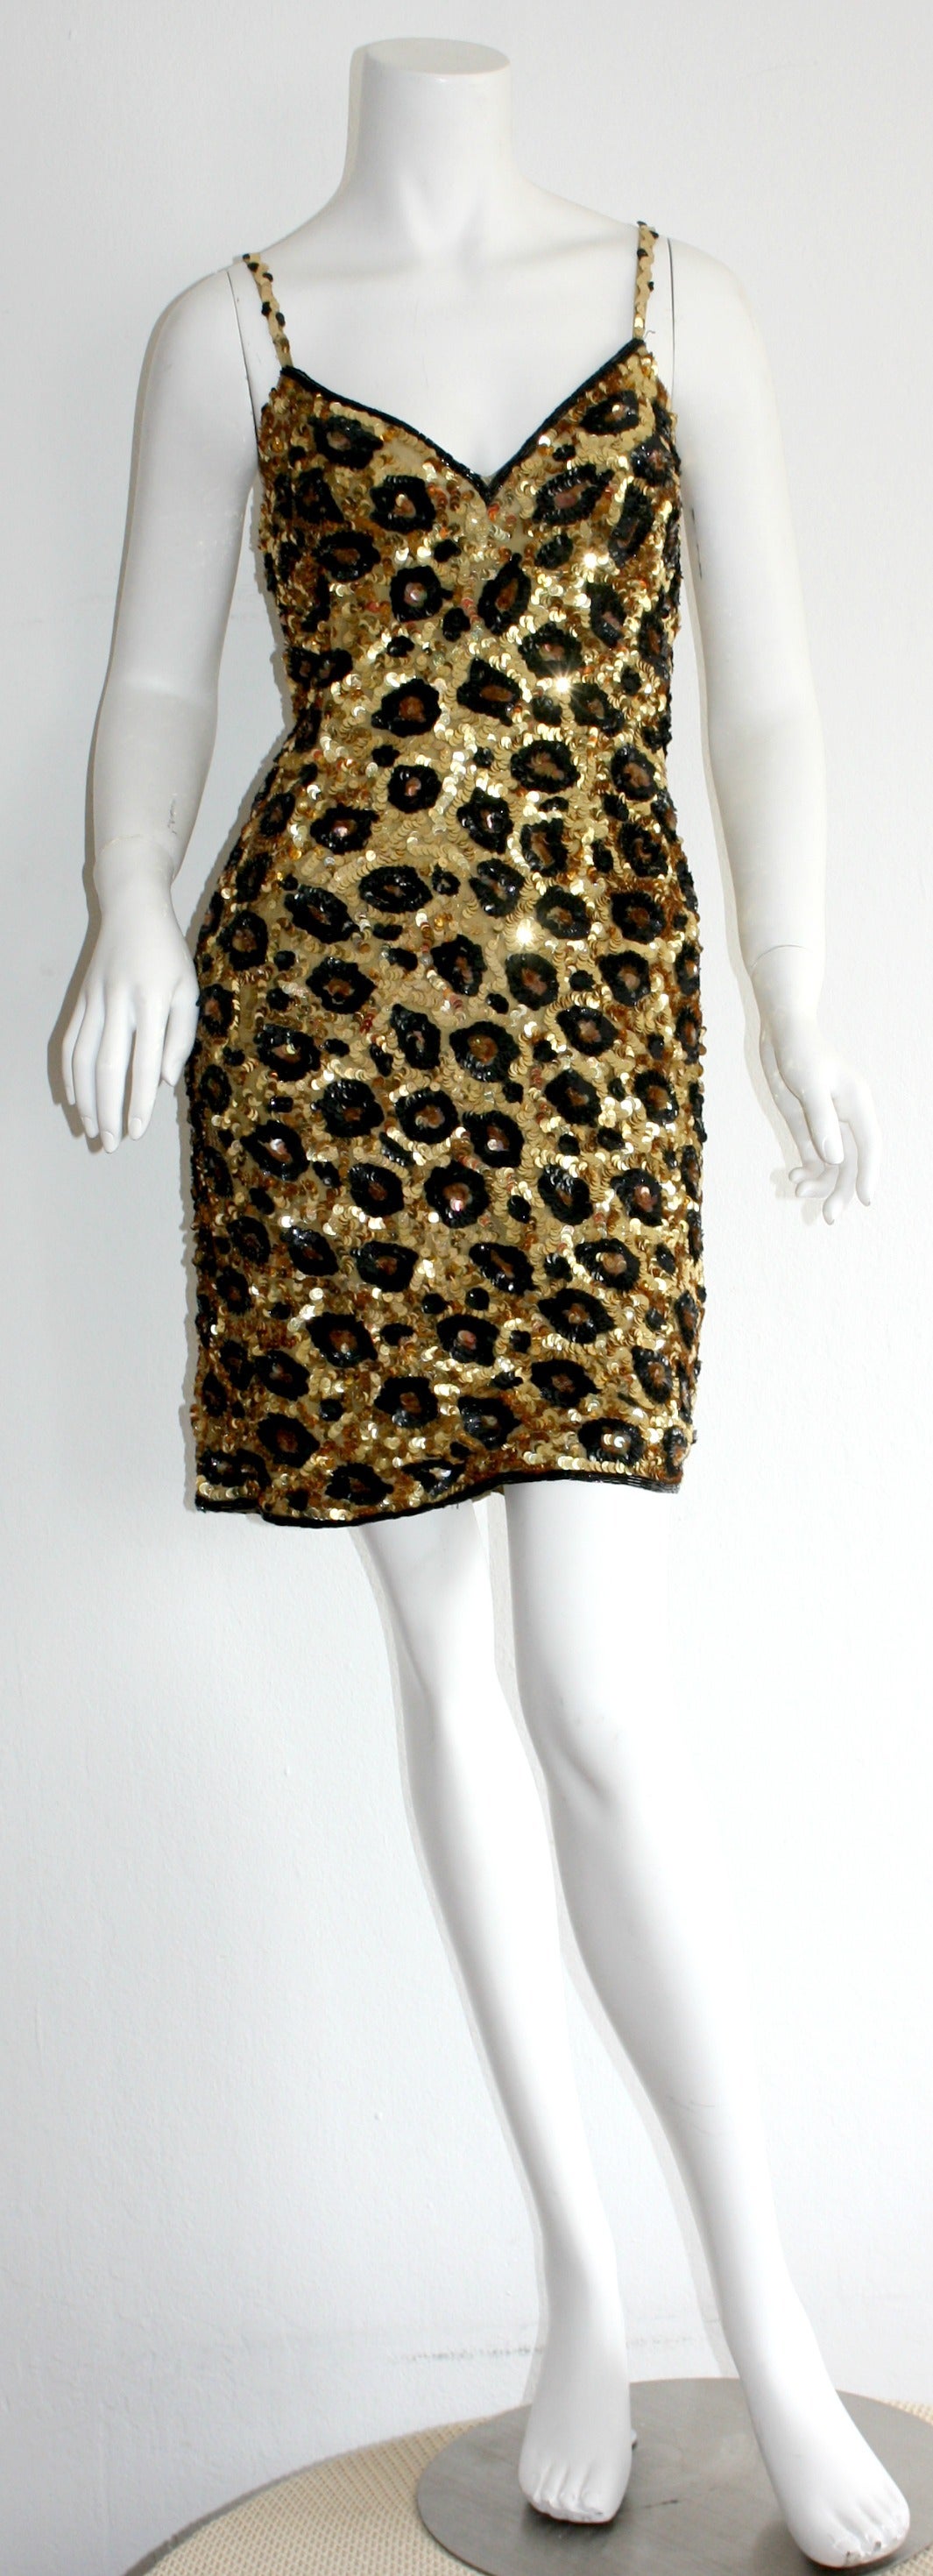 Sexy vintage early 1990s Jennifer Bawden one-of-a-kind leopard sequin mini dress!!! Bawden was a sought-after designer in the early 1990s, with several 